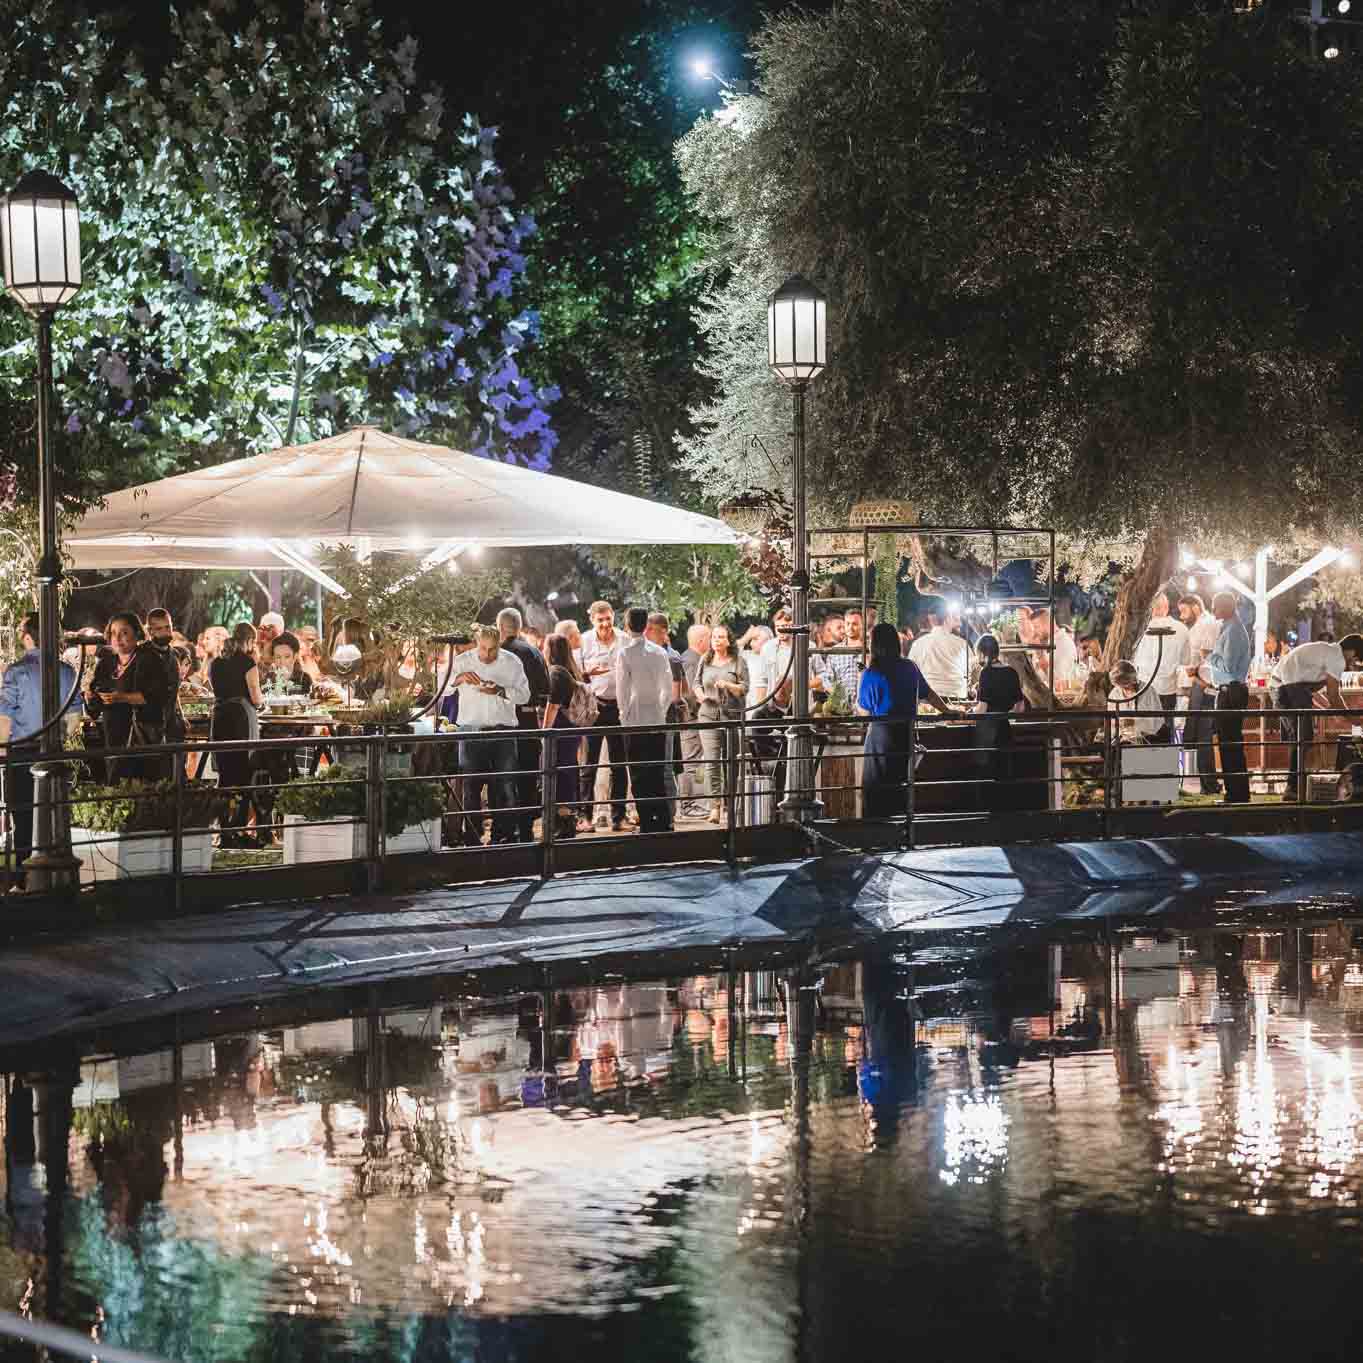 Guests at a reception in the garden under trees and an illuminated white parasols, reflected in the pool water